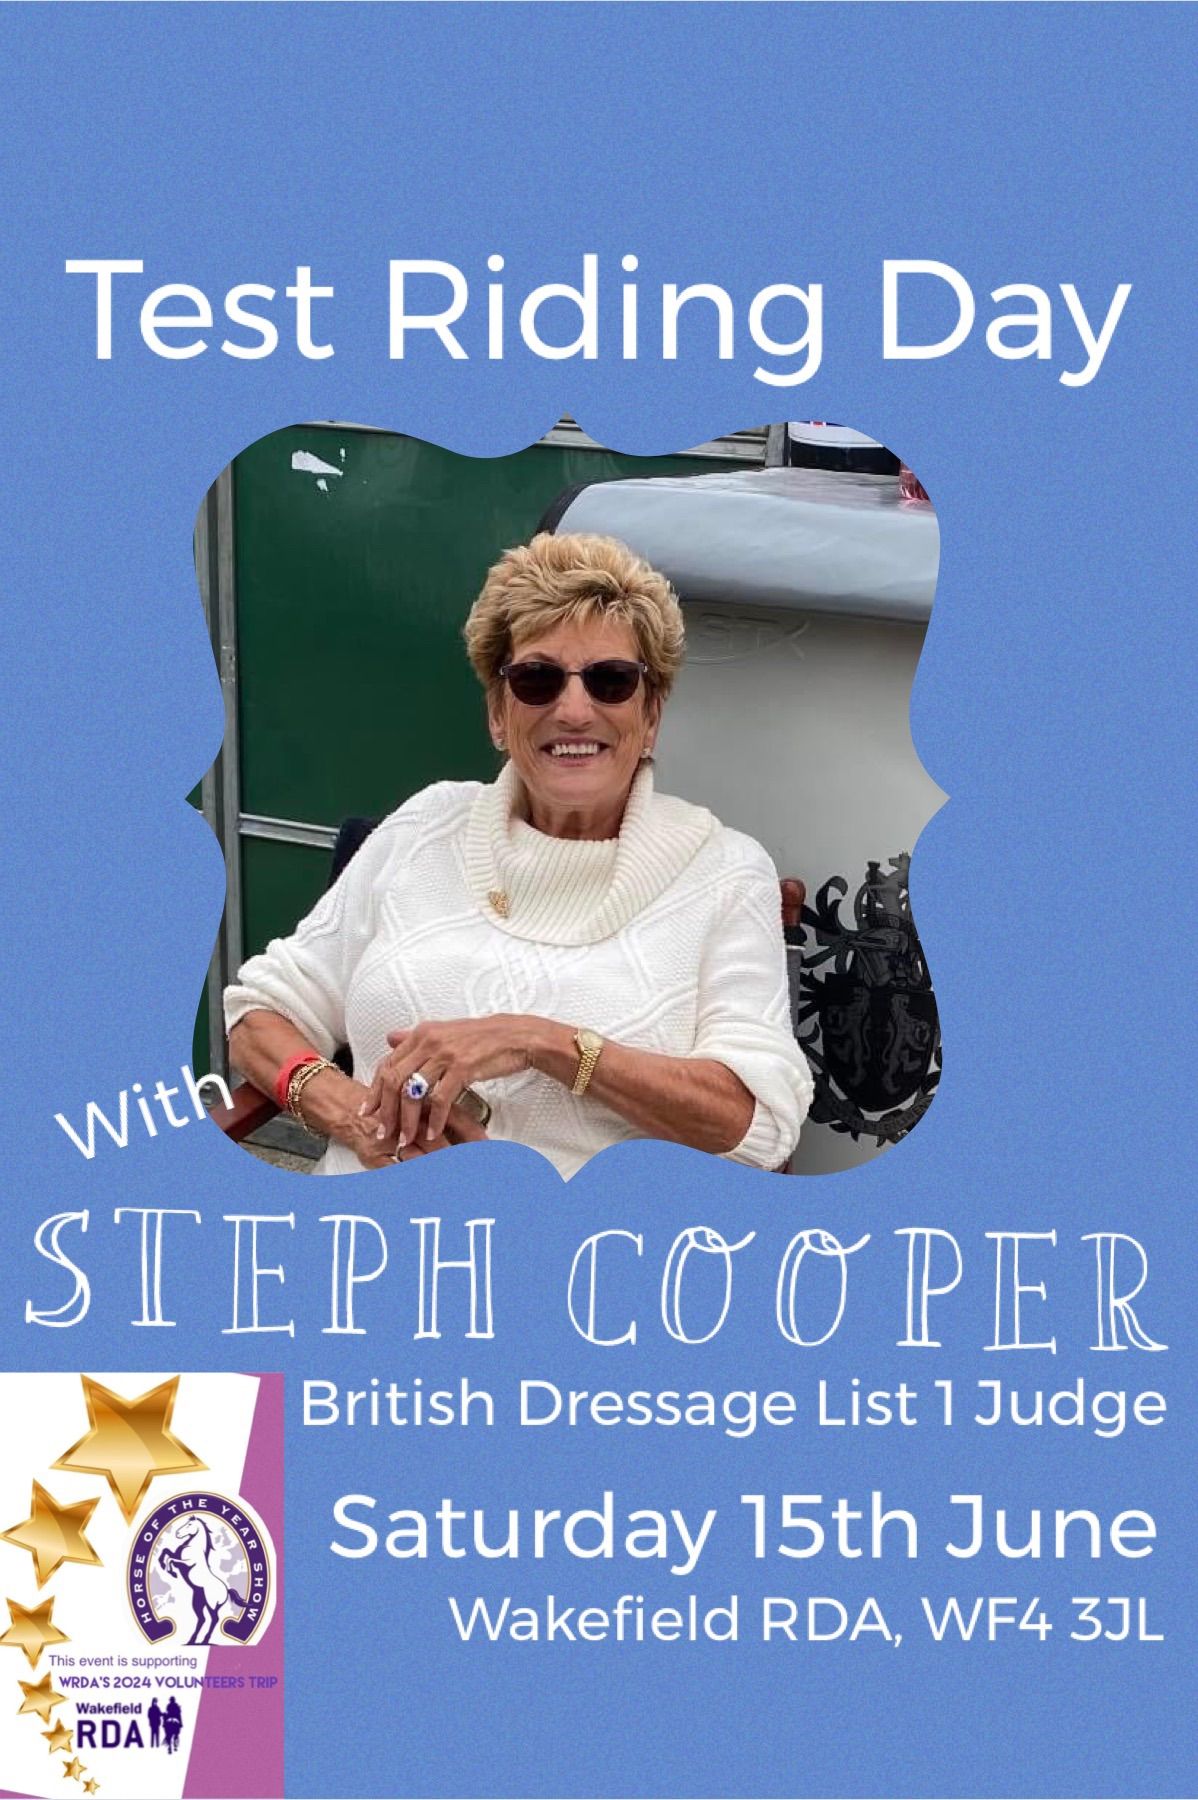 Steph Cooper - Test Riding Day